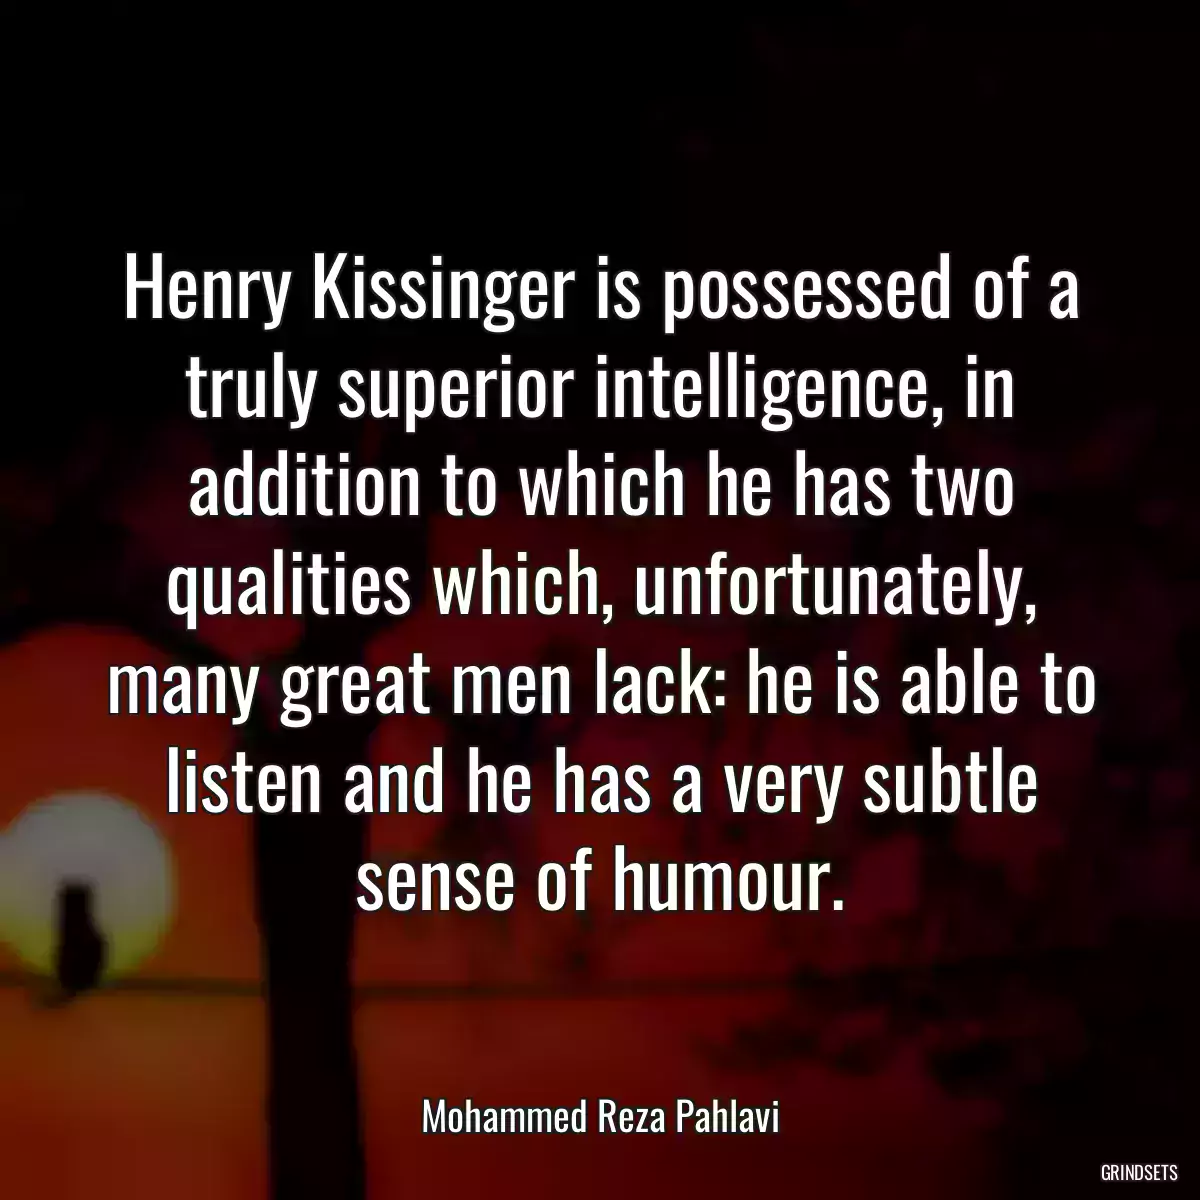 Henry Kissinger is possessed of a truly superior intelligence, in addition to which he has two qualities which, unfortunately, many great men lack: he is able to listen and he has a very subtle sense of humour.